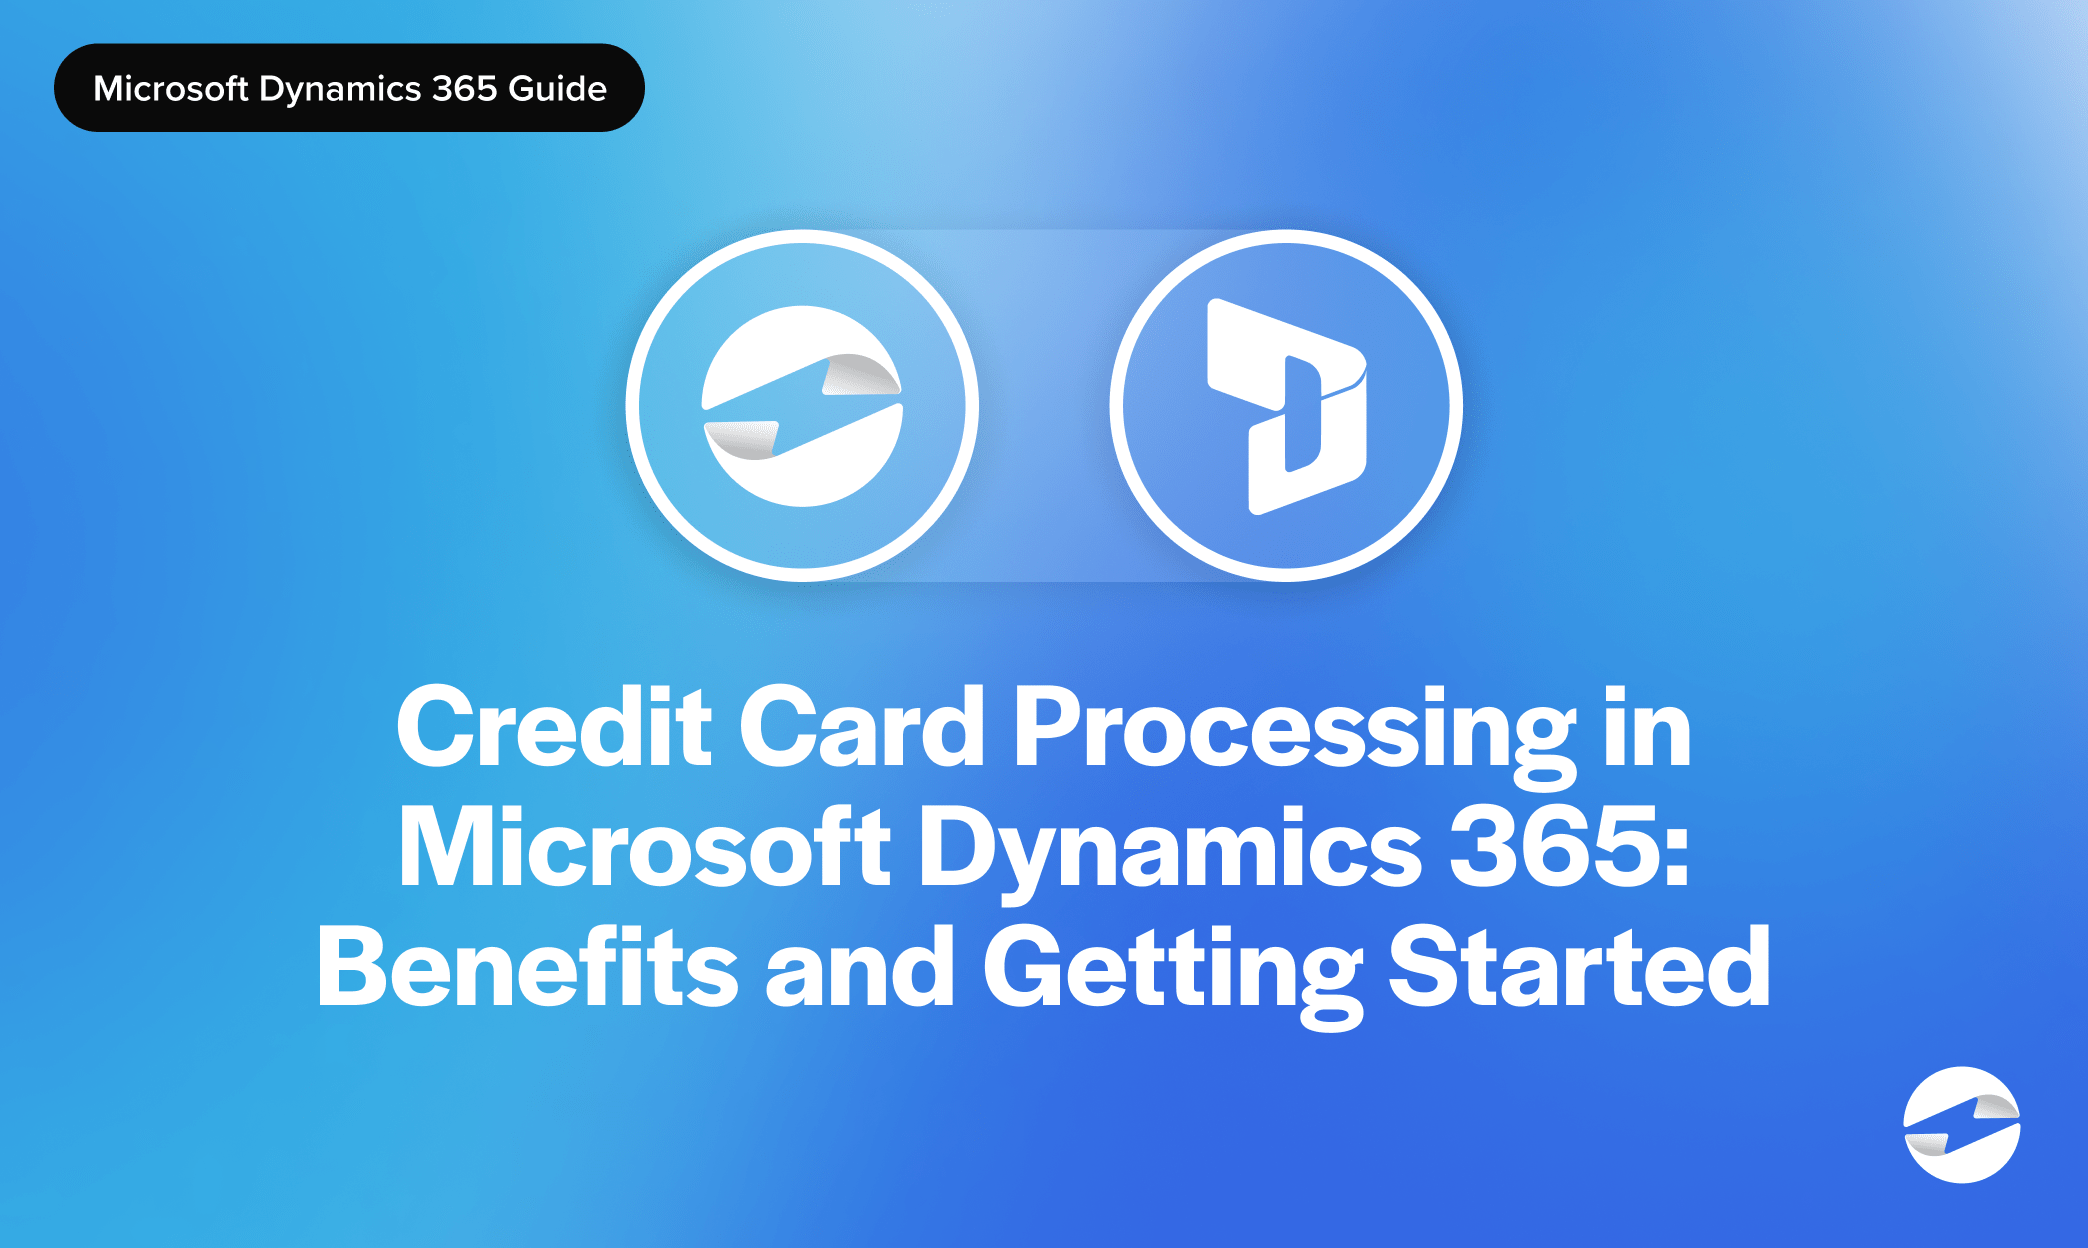 Credit Card Processing in Microsoft Dynamics 365: Benefits and Getting Started